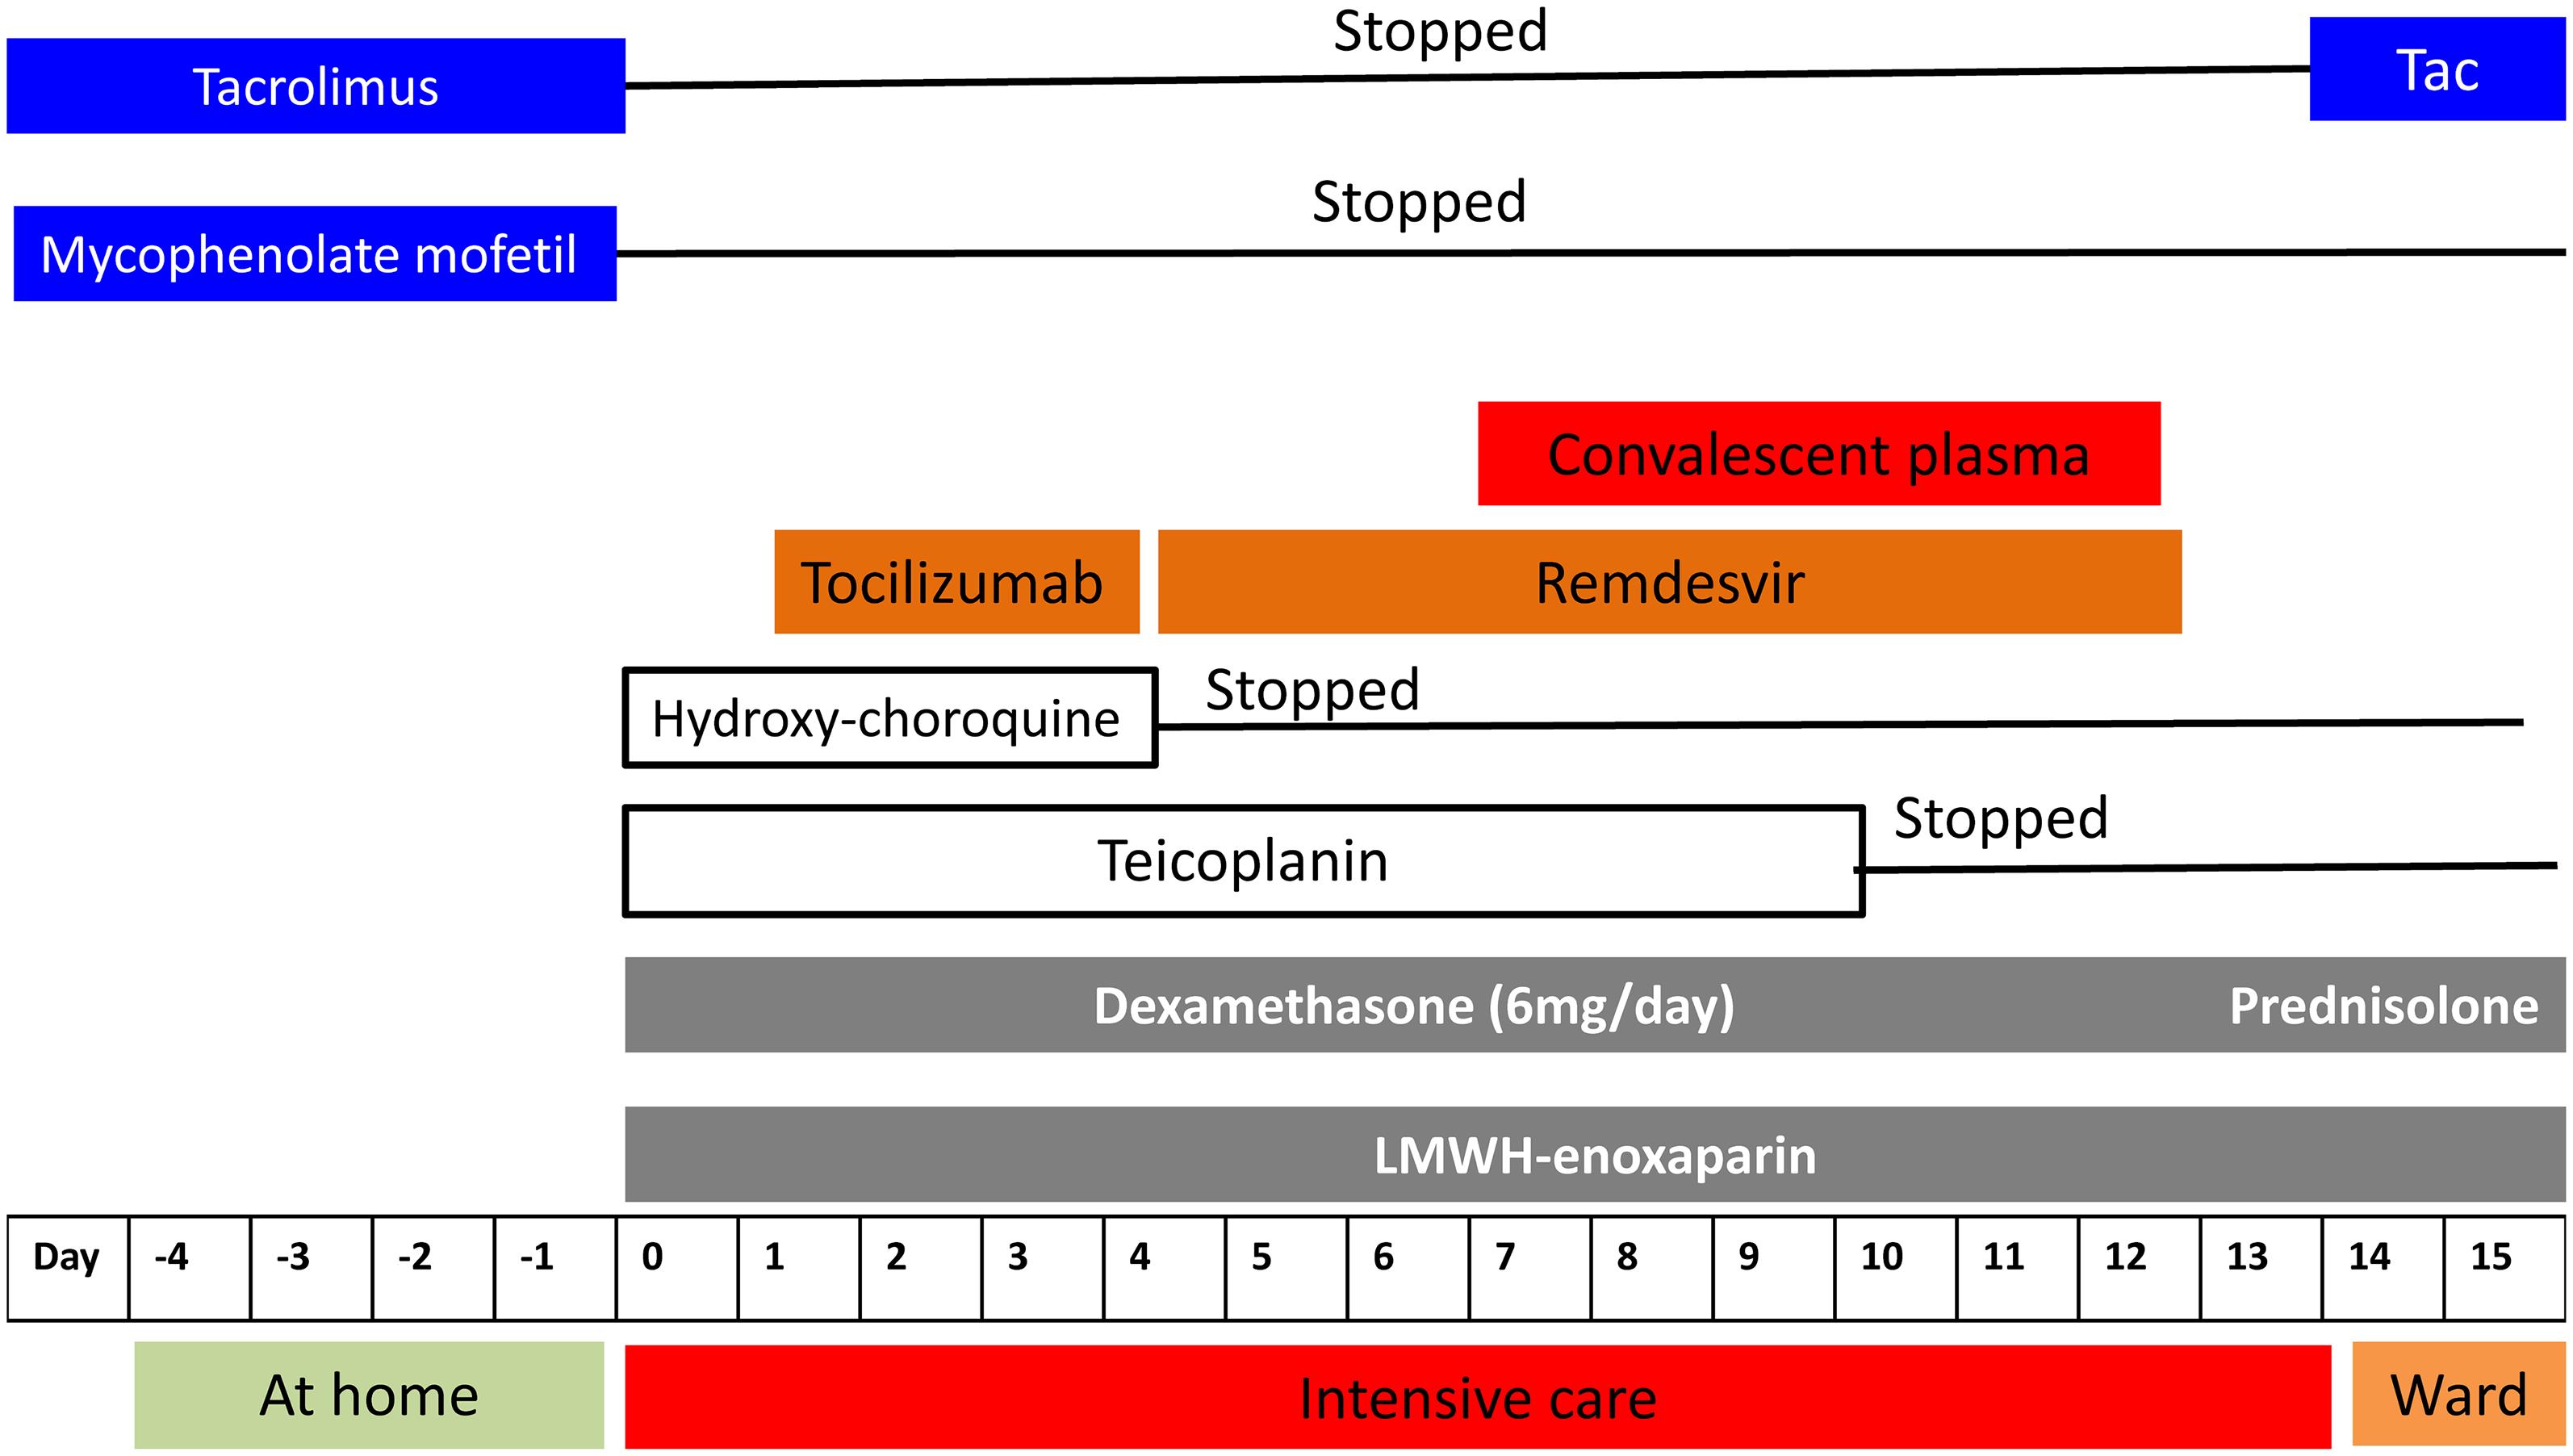 Treatment timeline of severe COVID-19 case.